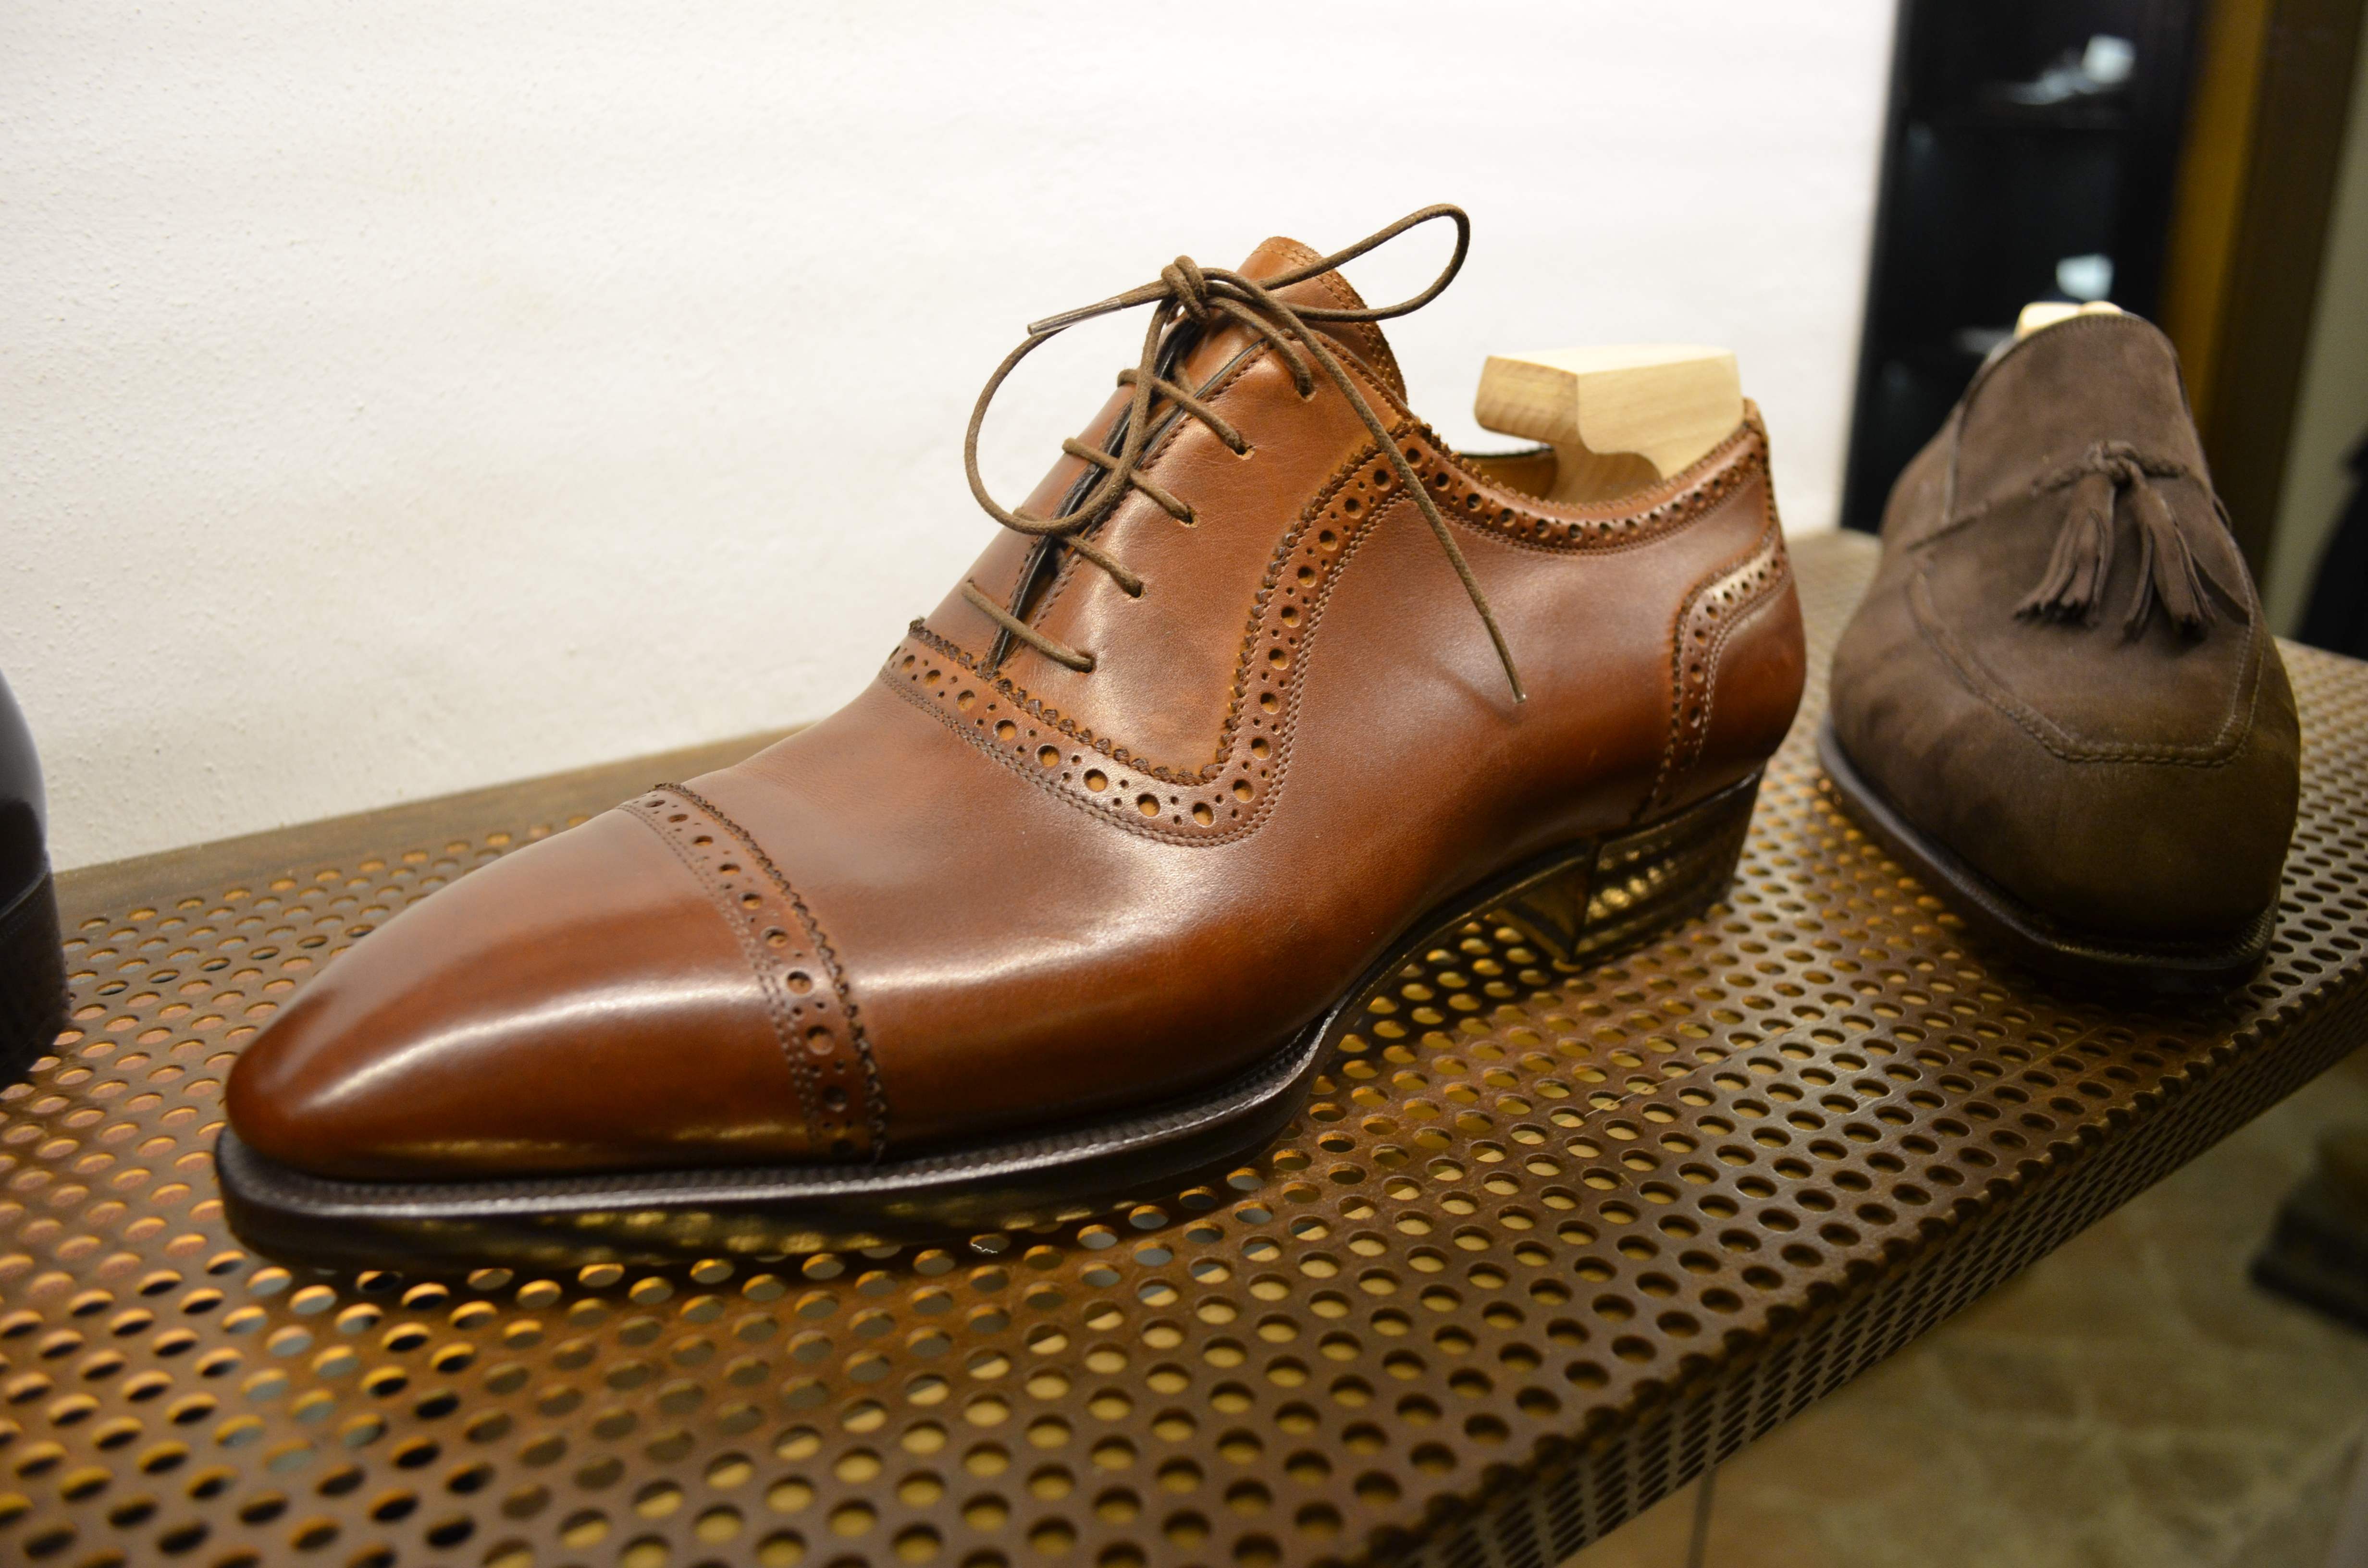 Riccardo Freccia Bestetti bespoke shoes on display at the BeShoes Symposium organized by UK journalist Simon Crompton and the Stefano Bemer bespoke brand.